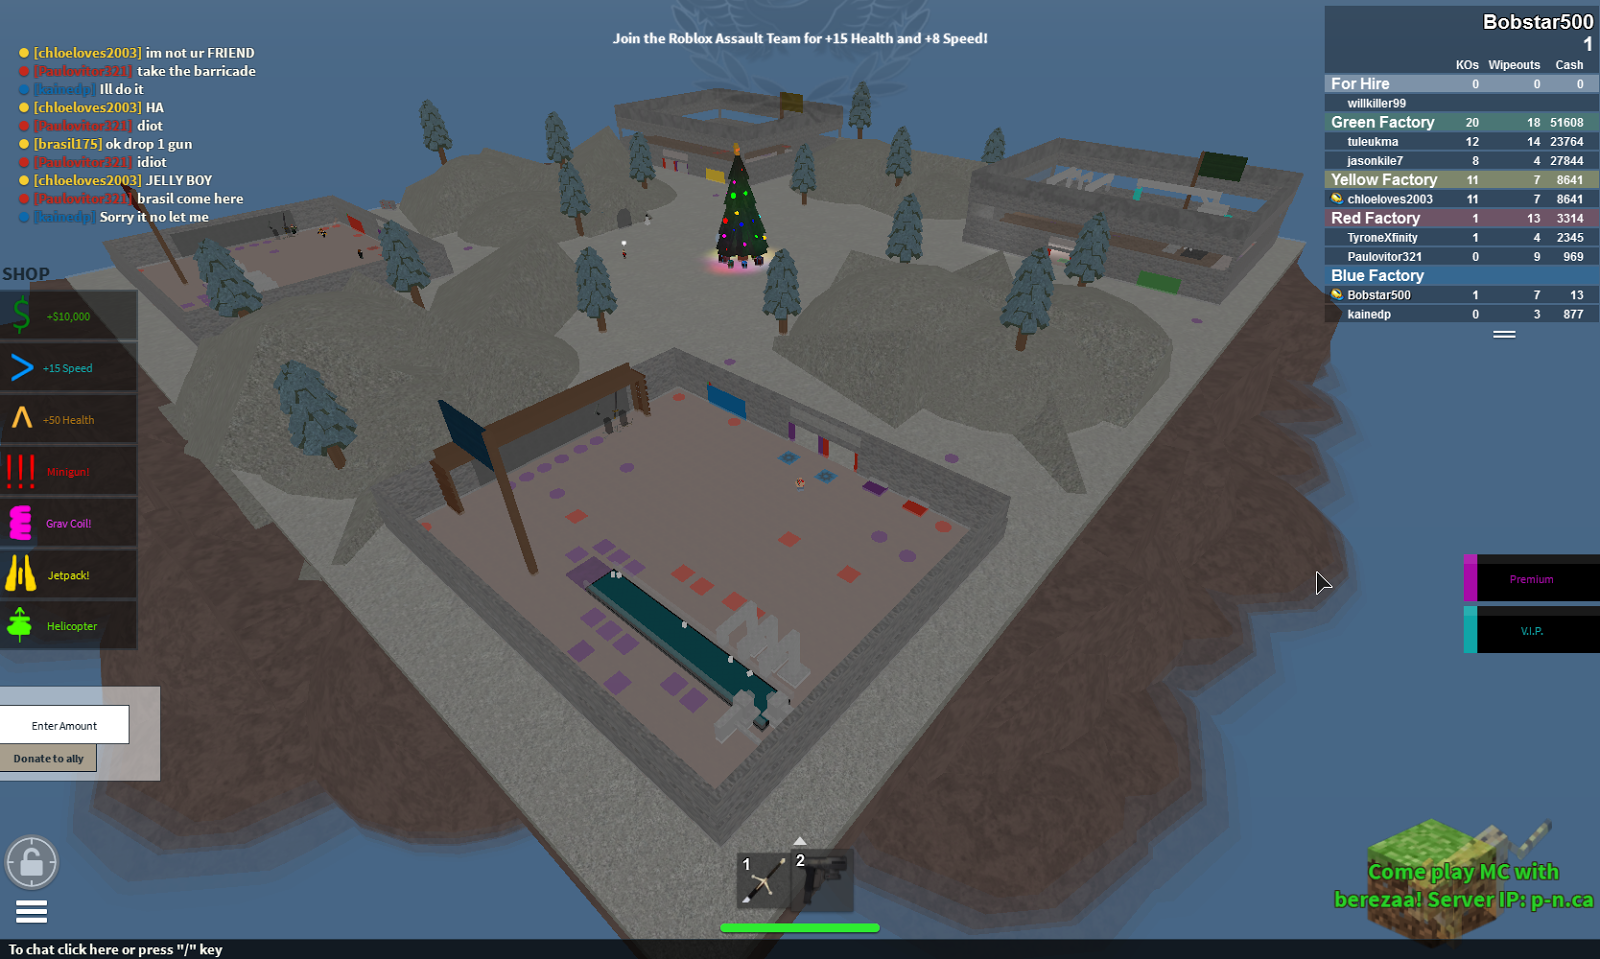 Unofficial Roblox Roblox Games Best Of 2014 - roblox times sunday september 26 2010 roblox madness